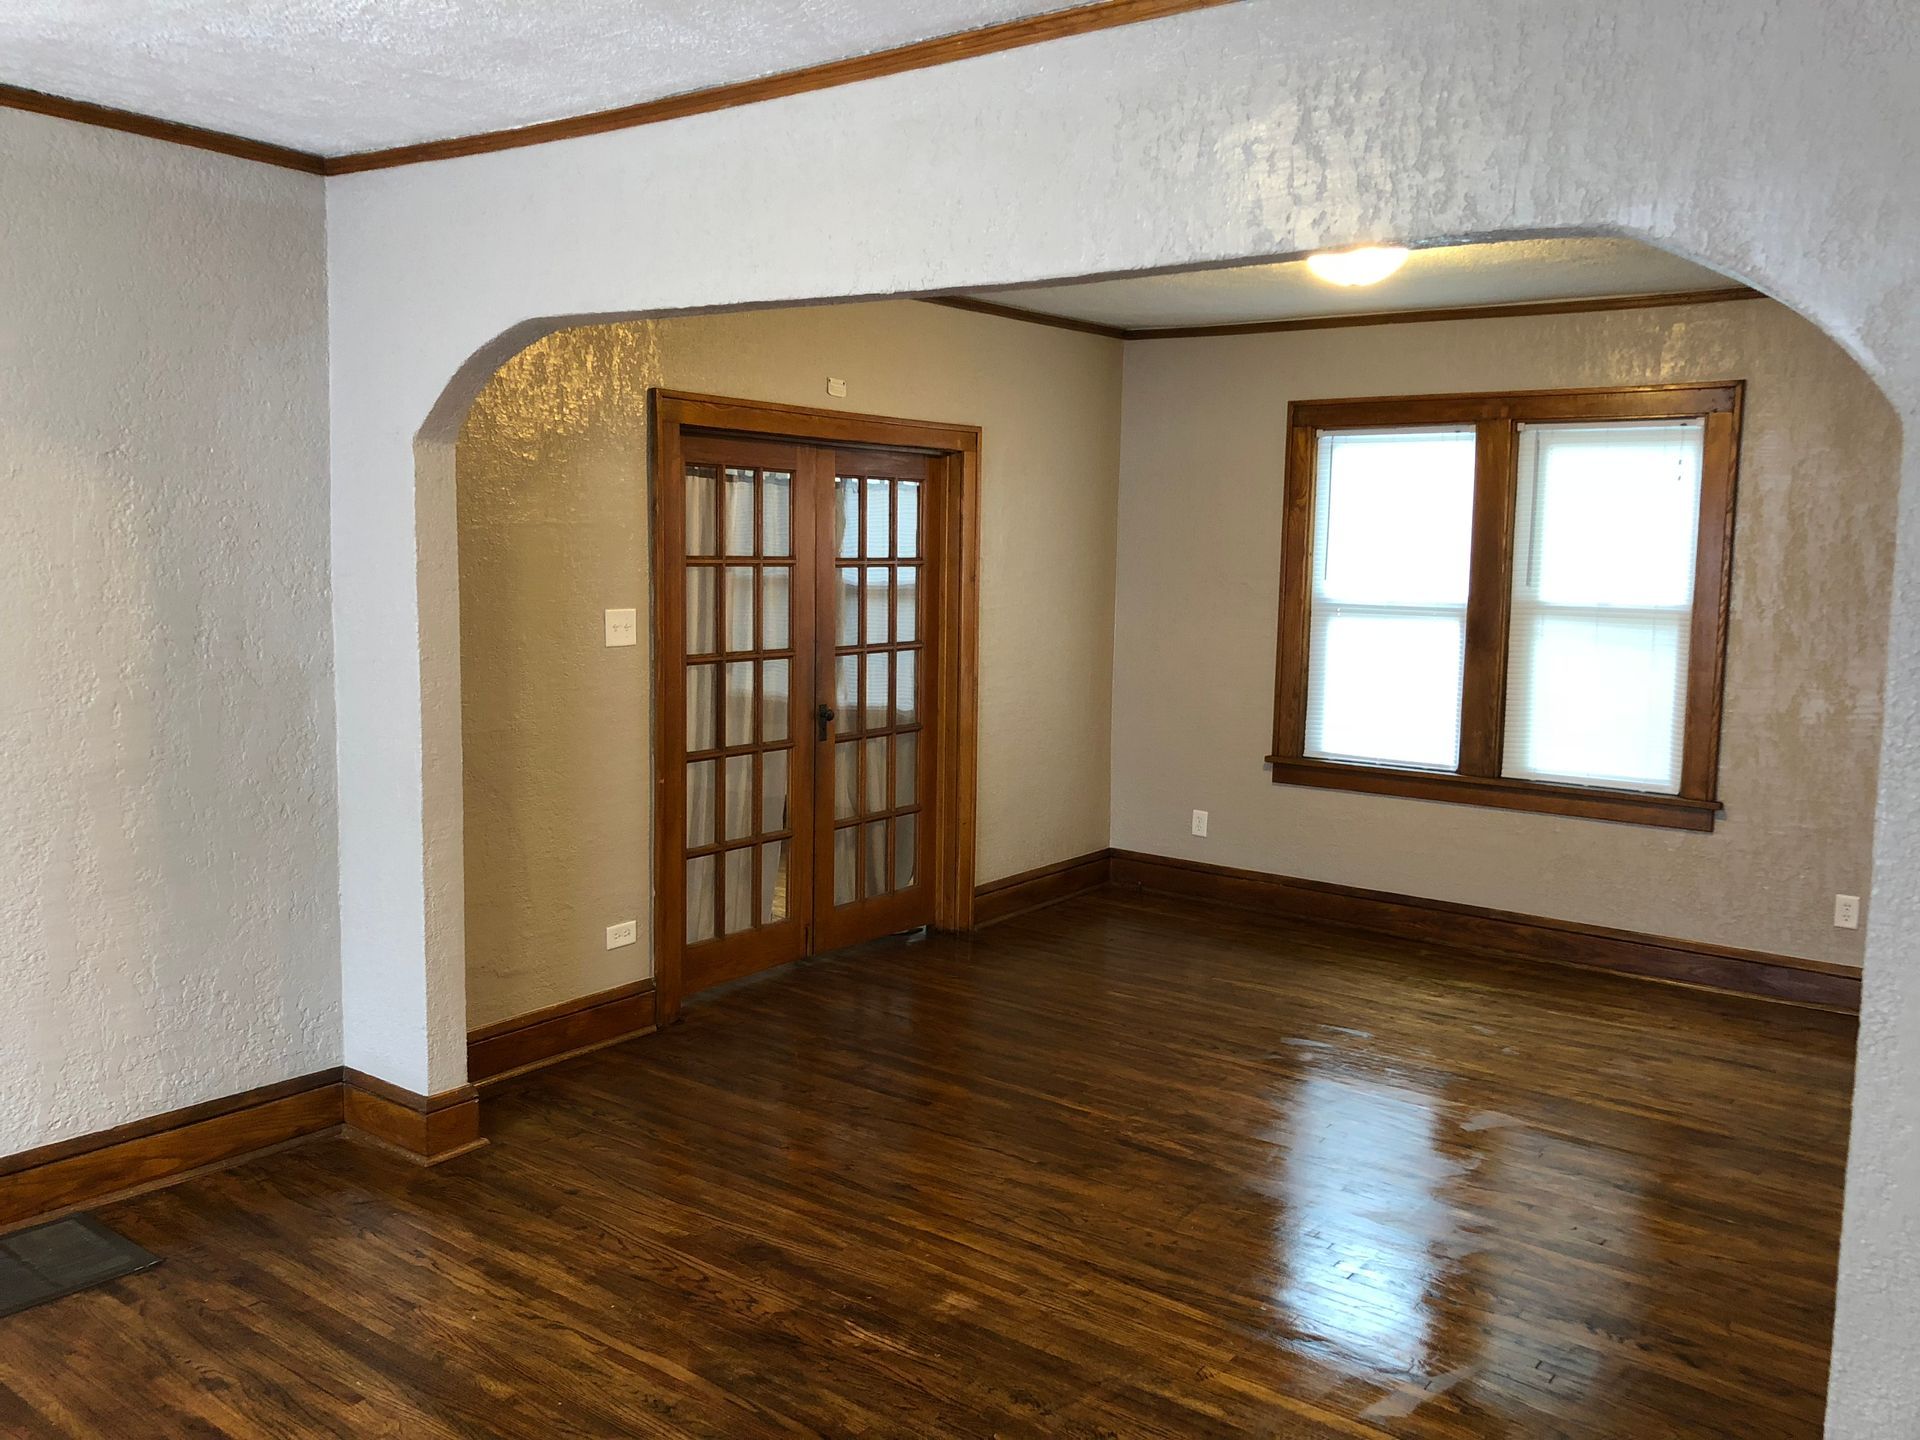 An empty living room with hardwood floors and french doors.